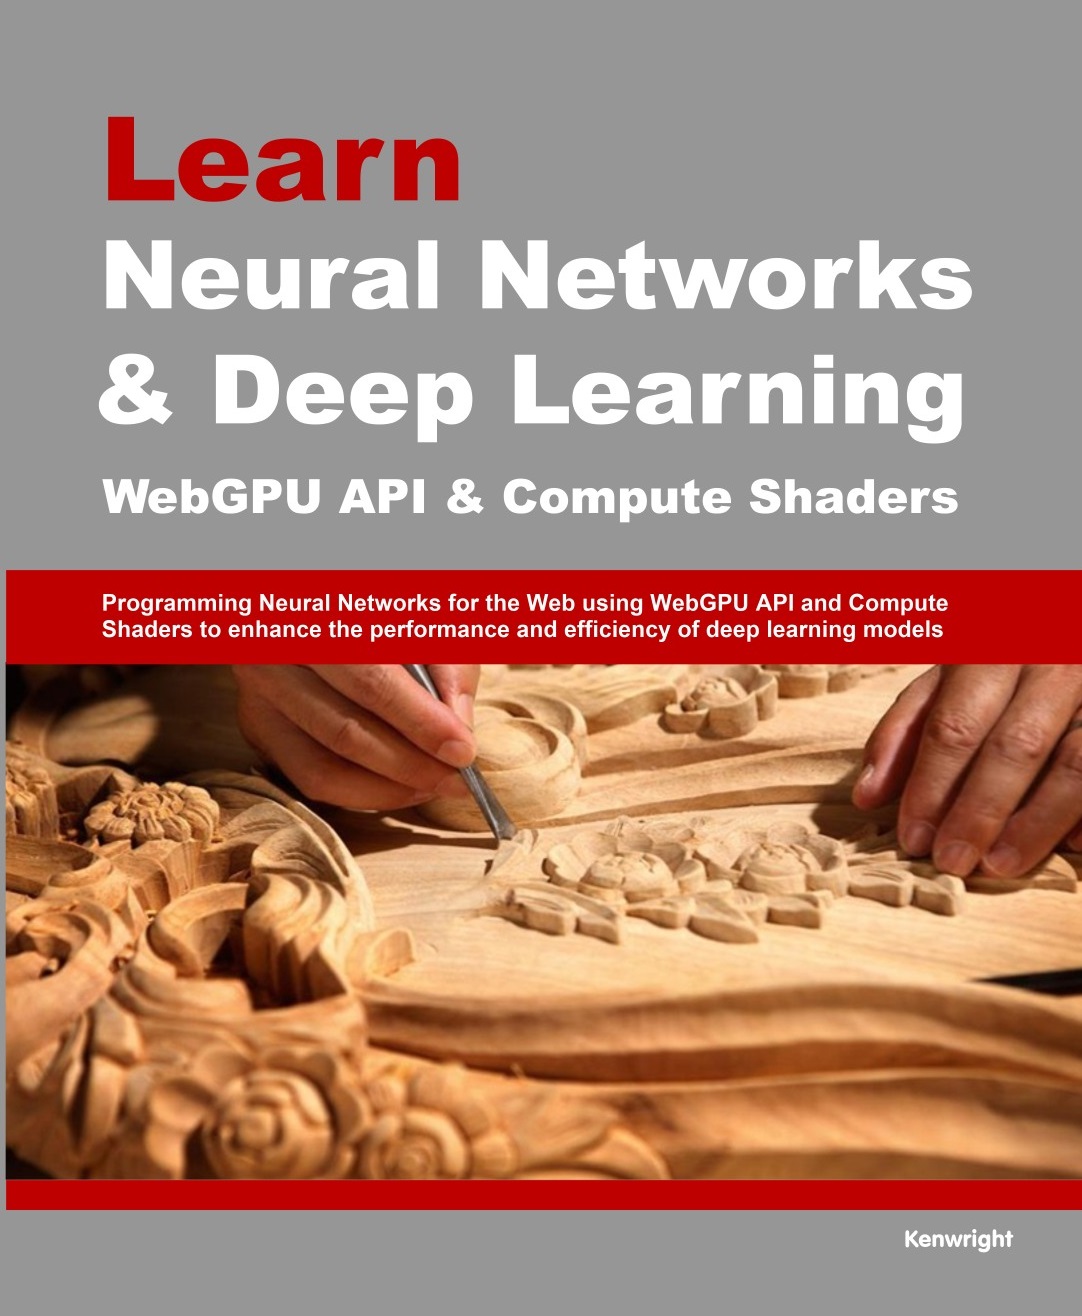 Learn Neural Networks and Deep Learning with WebGPU and Compute Shaders